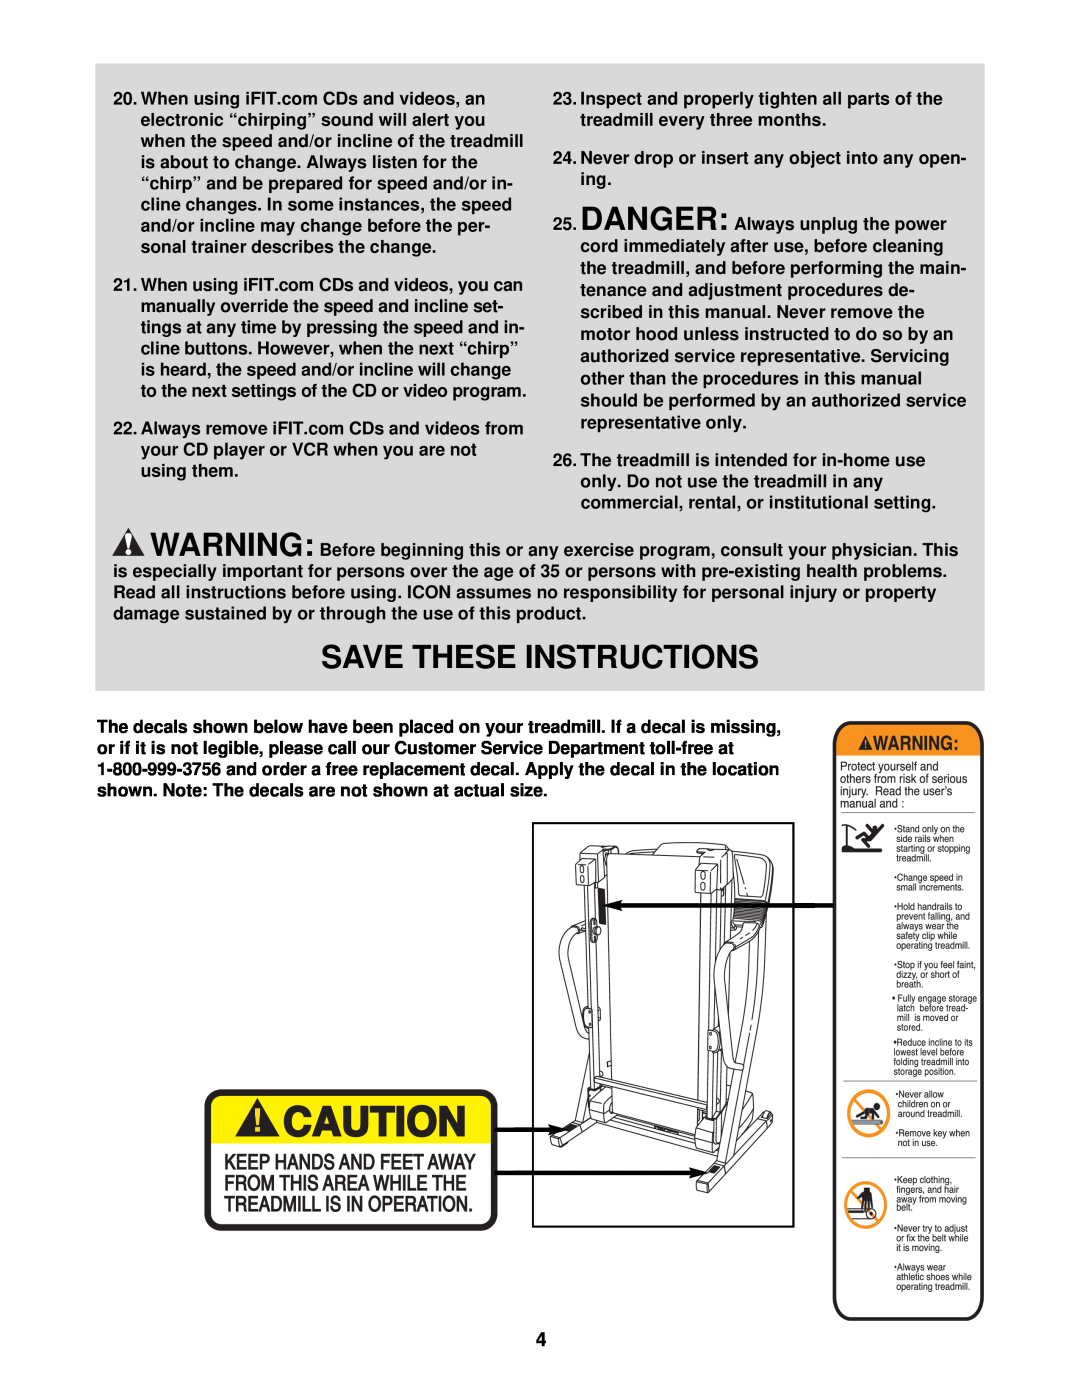 ProForm DTL62940 user manual Save These Instructions, Never drop or insert any object into any open- ing 